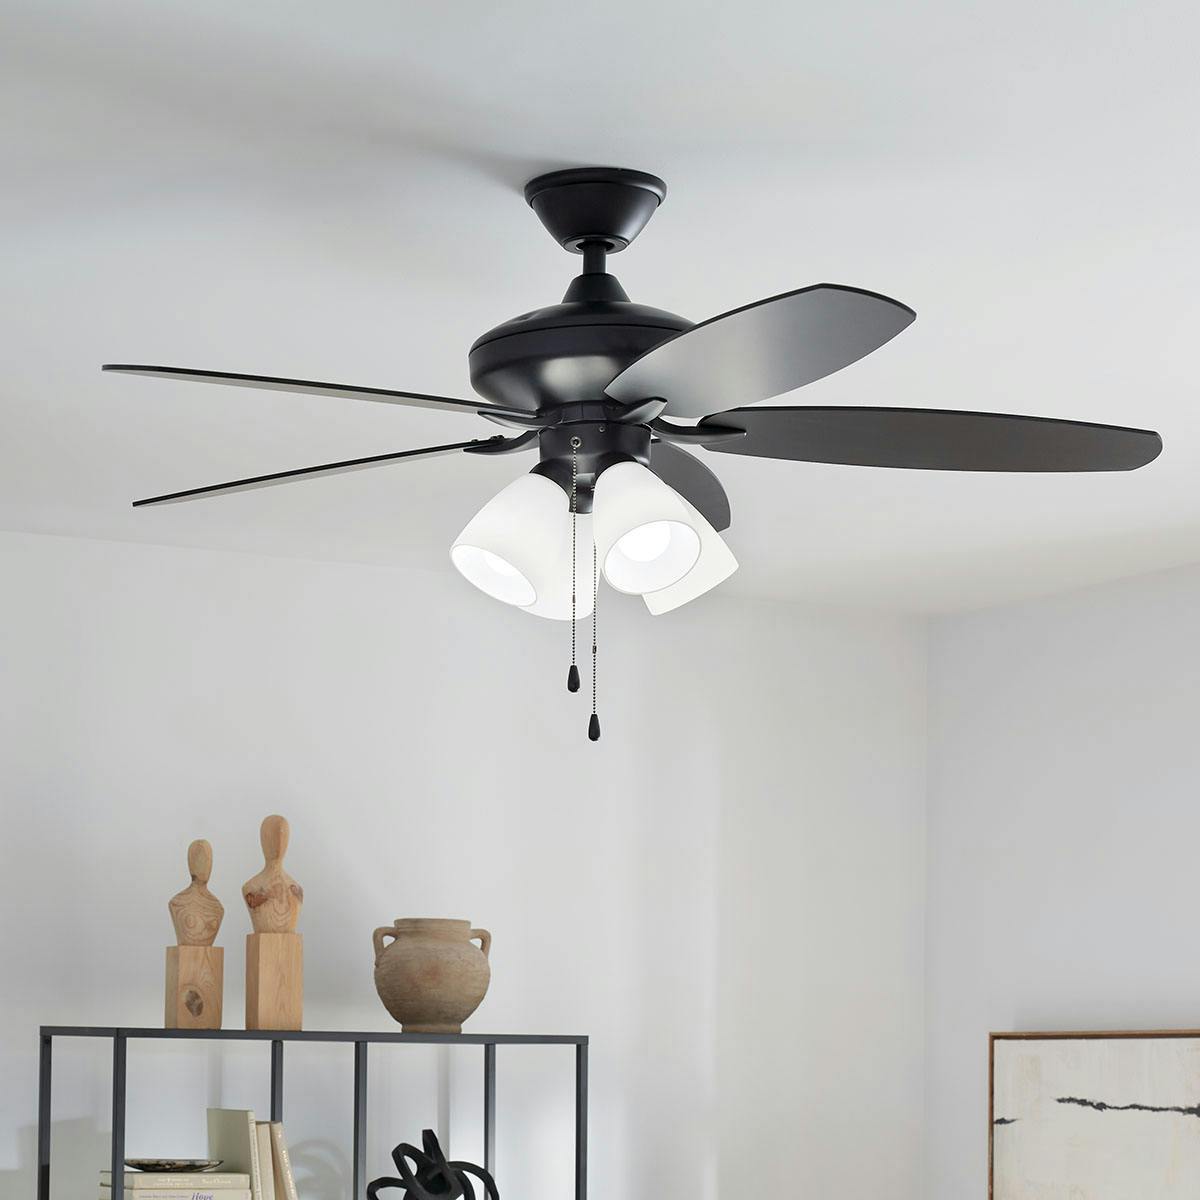 Day time living room featuring Renew ceiling fan 330162SBK